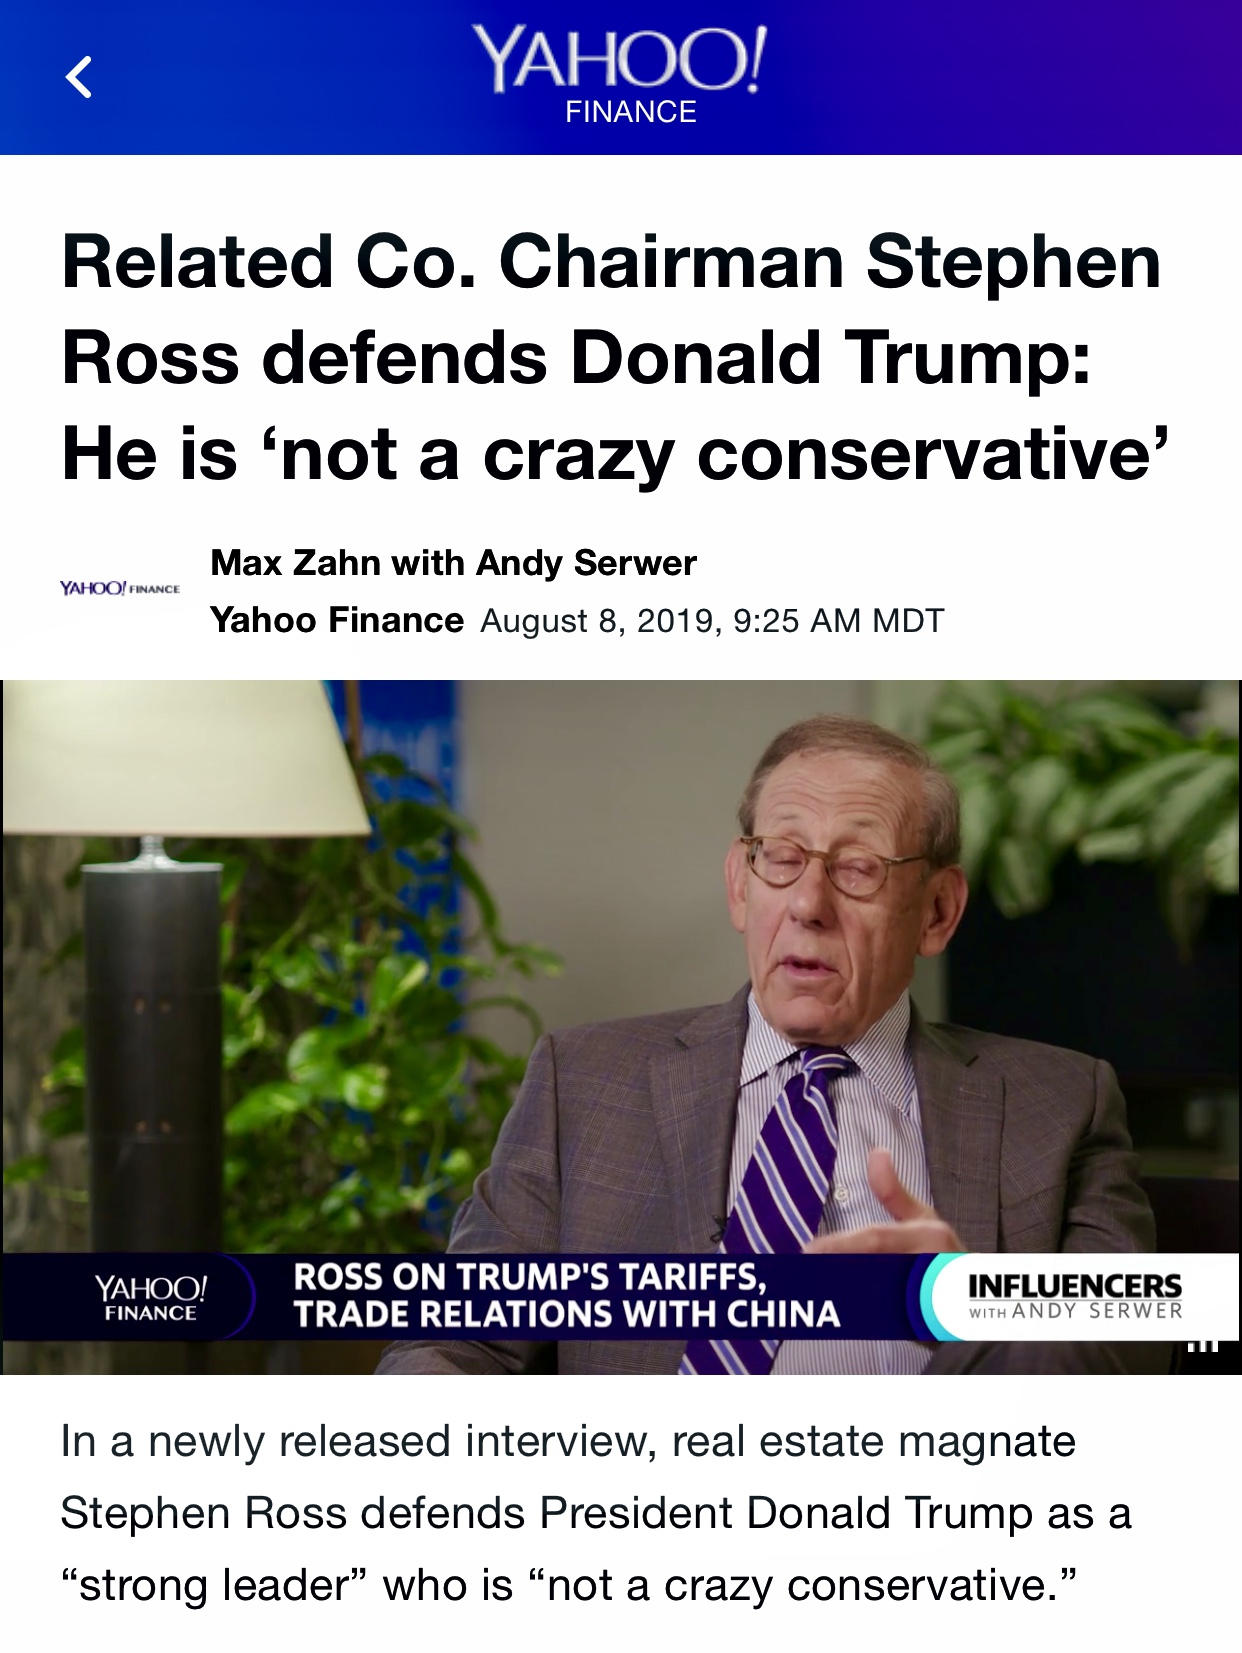 President Trump Supporter: Related Co. Chairman Stephen Ross defends Donald Trump: He is ‘not a crazy conservative’